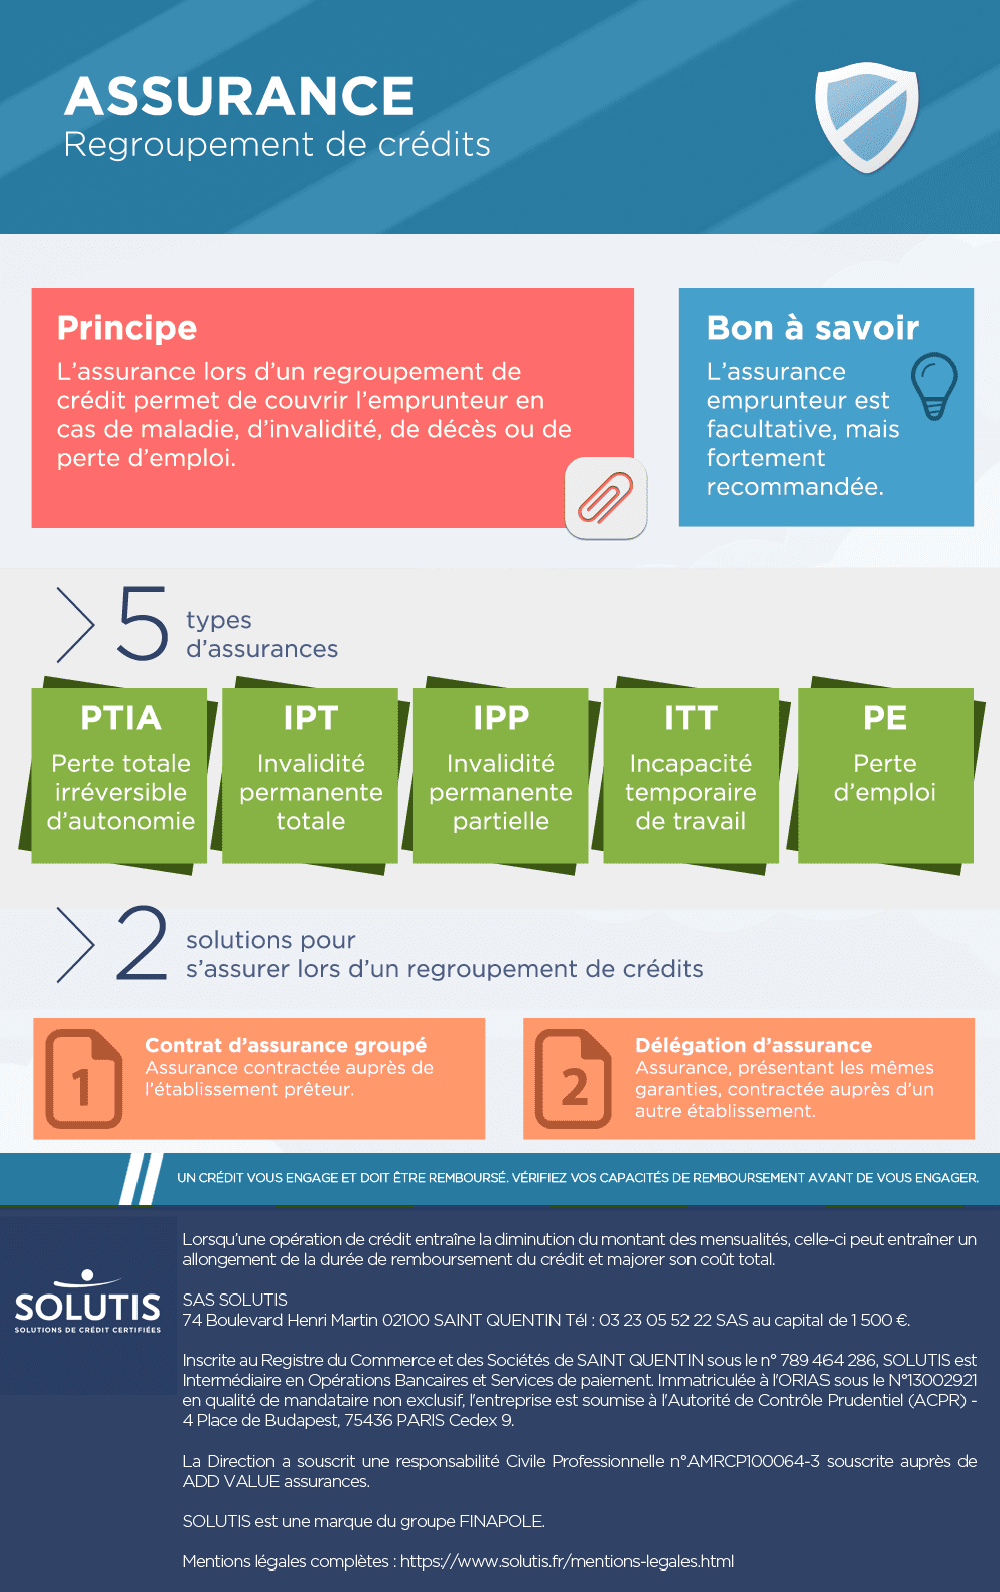 /images/actualites/infographie/infographie-assurance-regroupement-credit-20140903.png